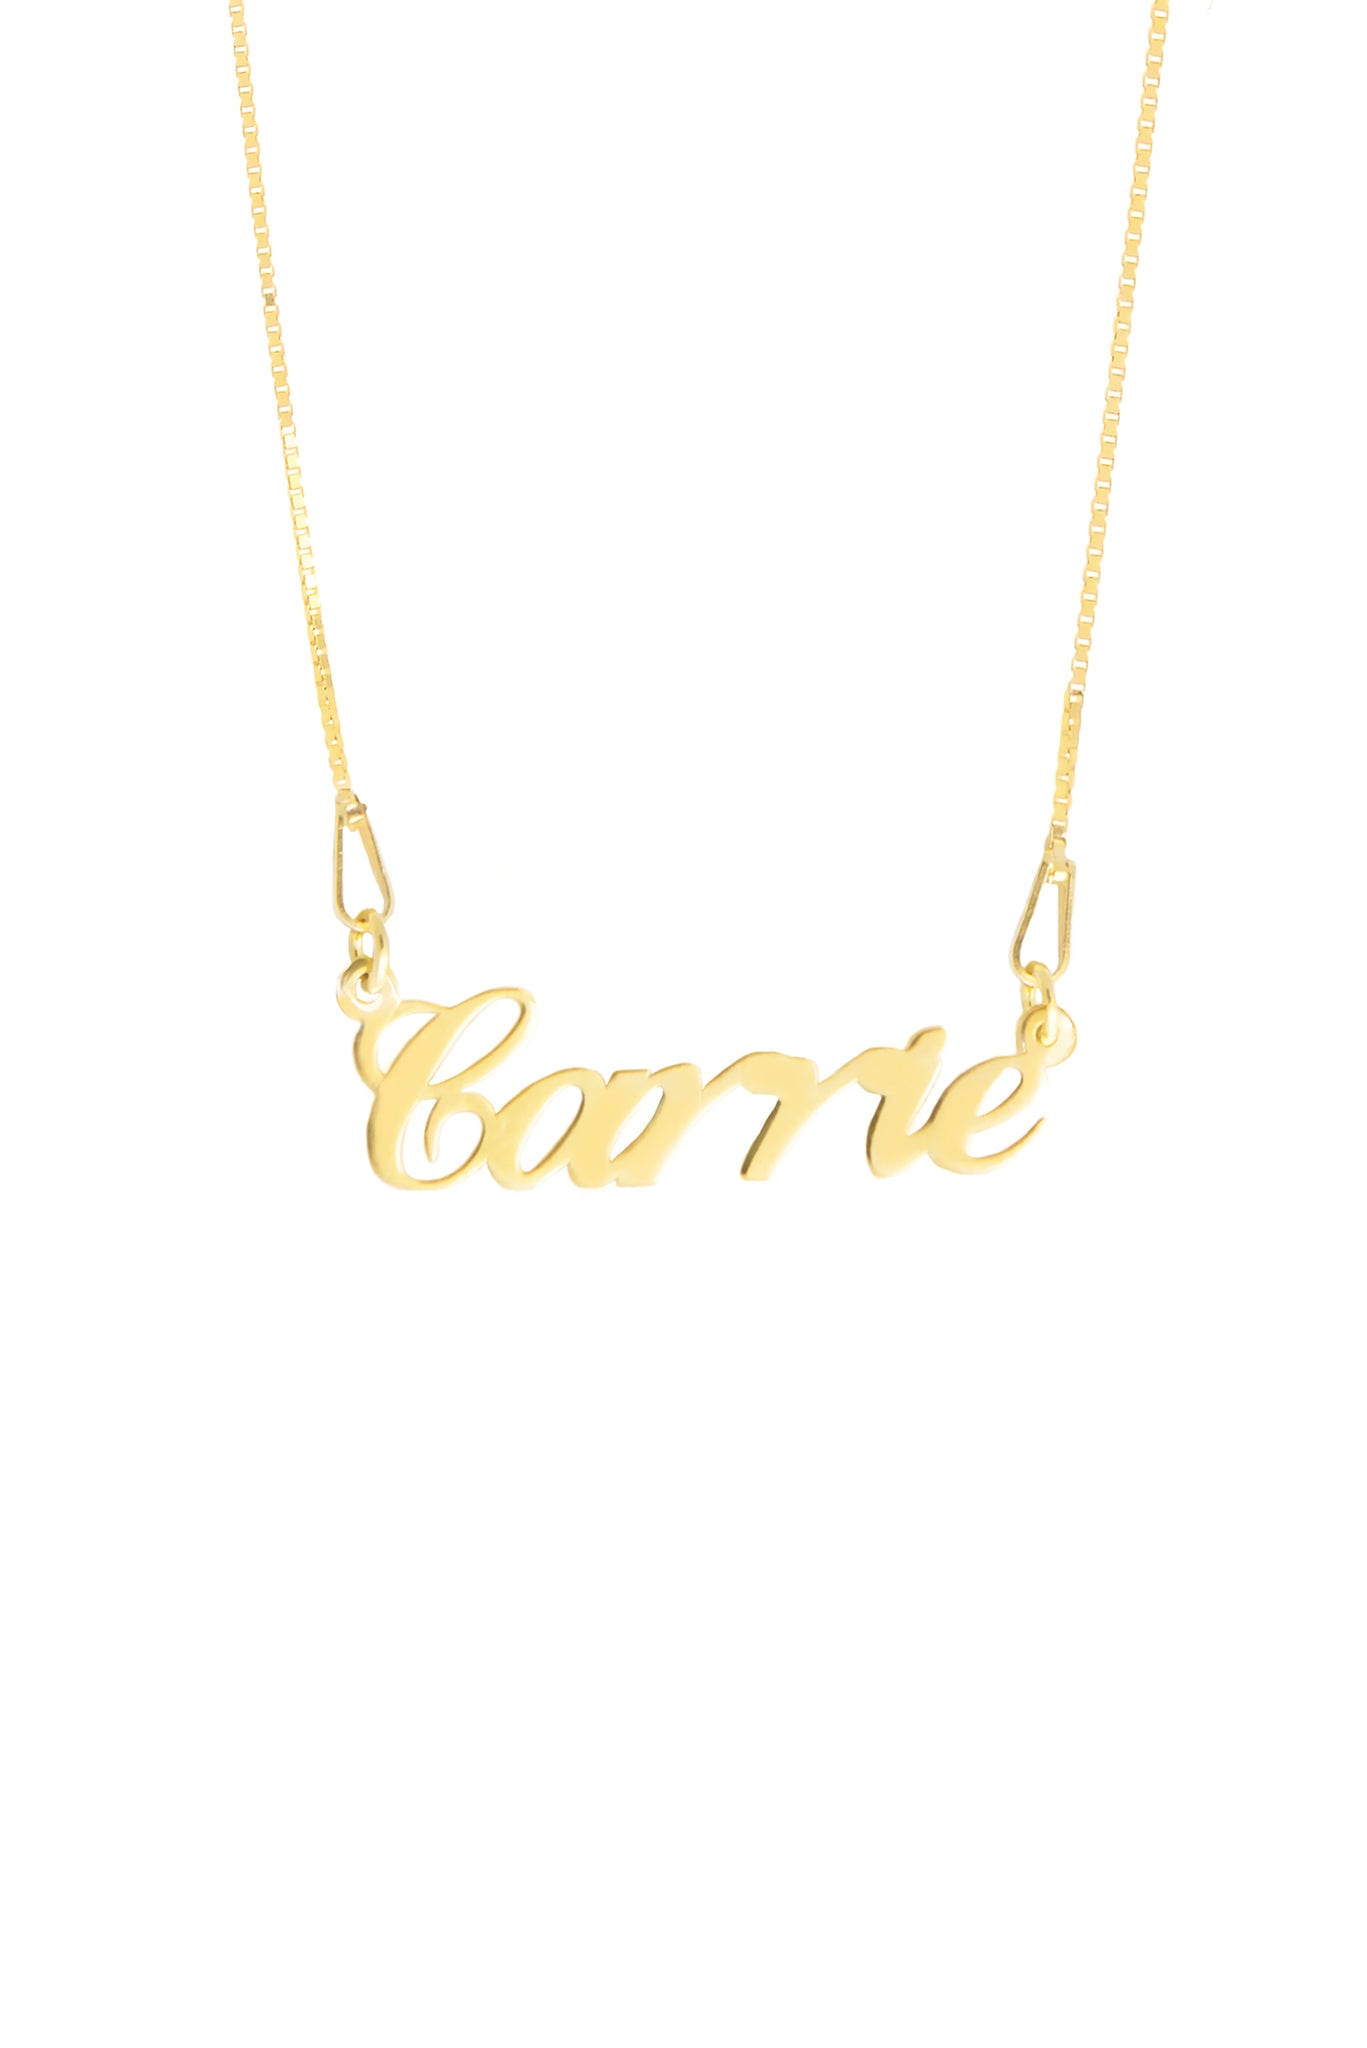 The Carrie Bradshaw Necklace - Create Yours